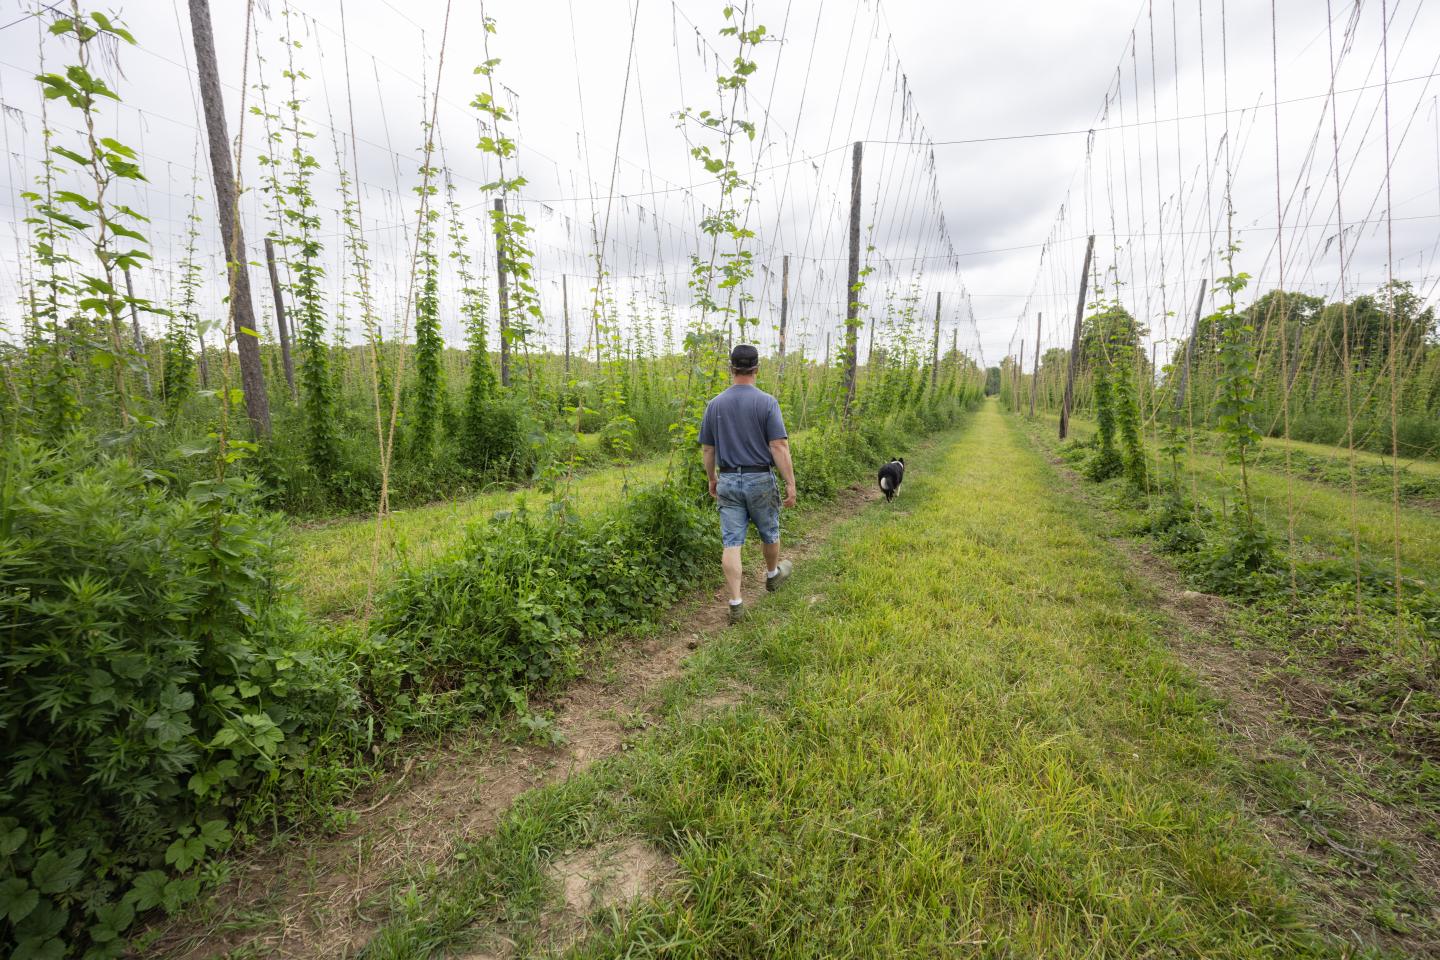 A man walks down a row of trellises with vines of hops growing up them